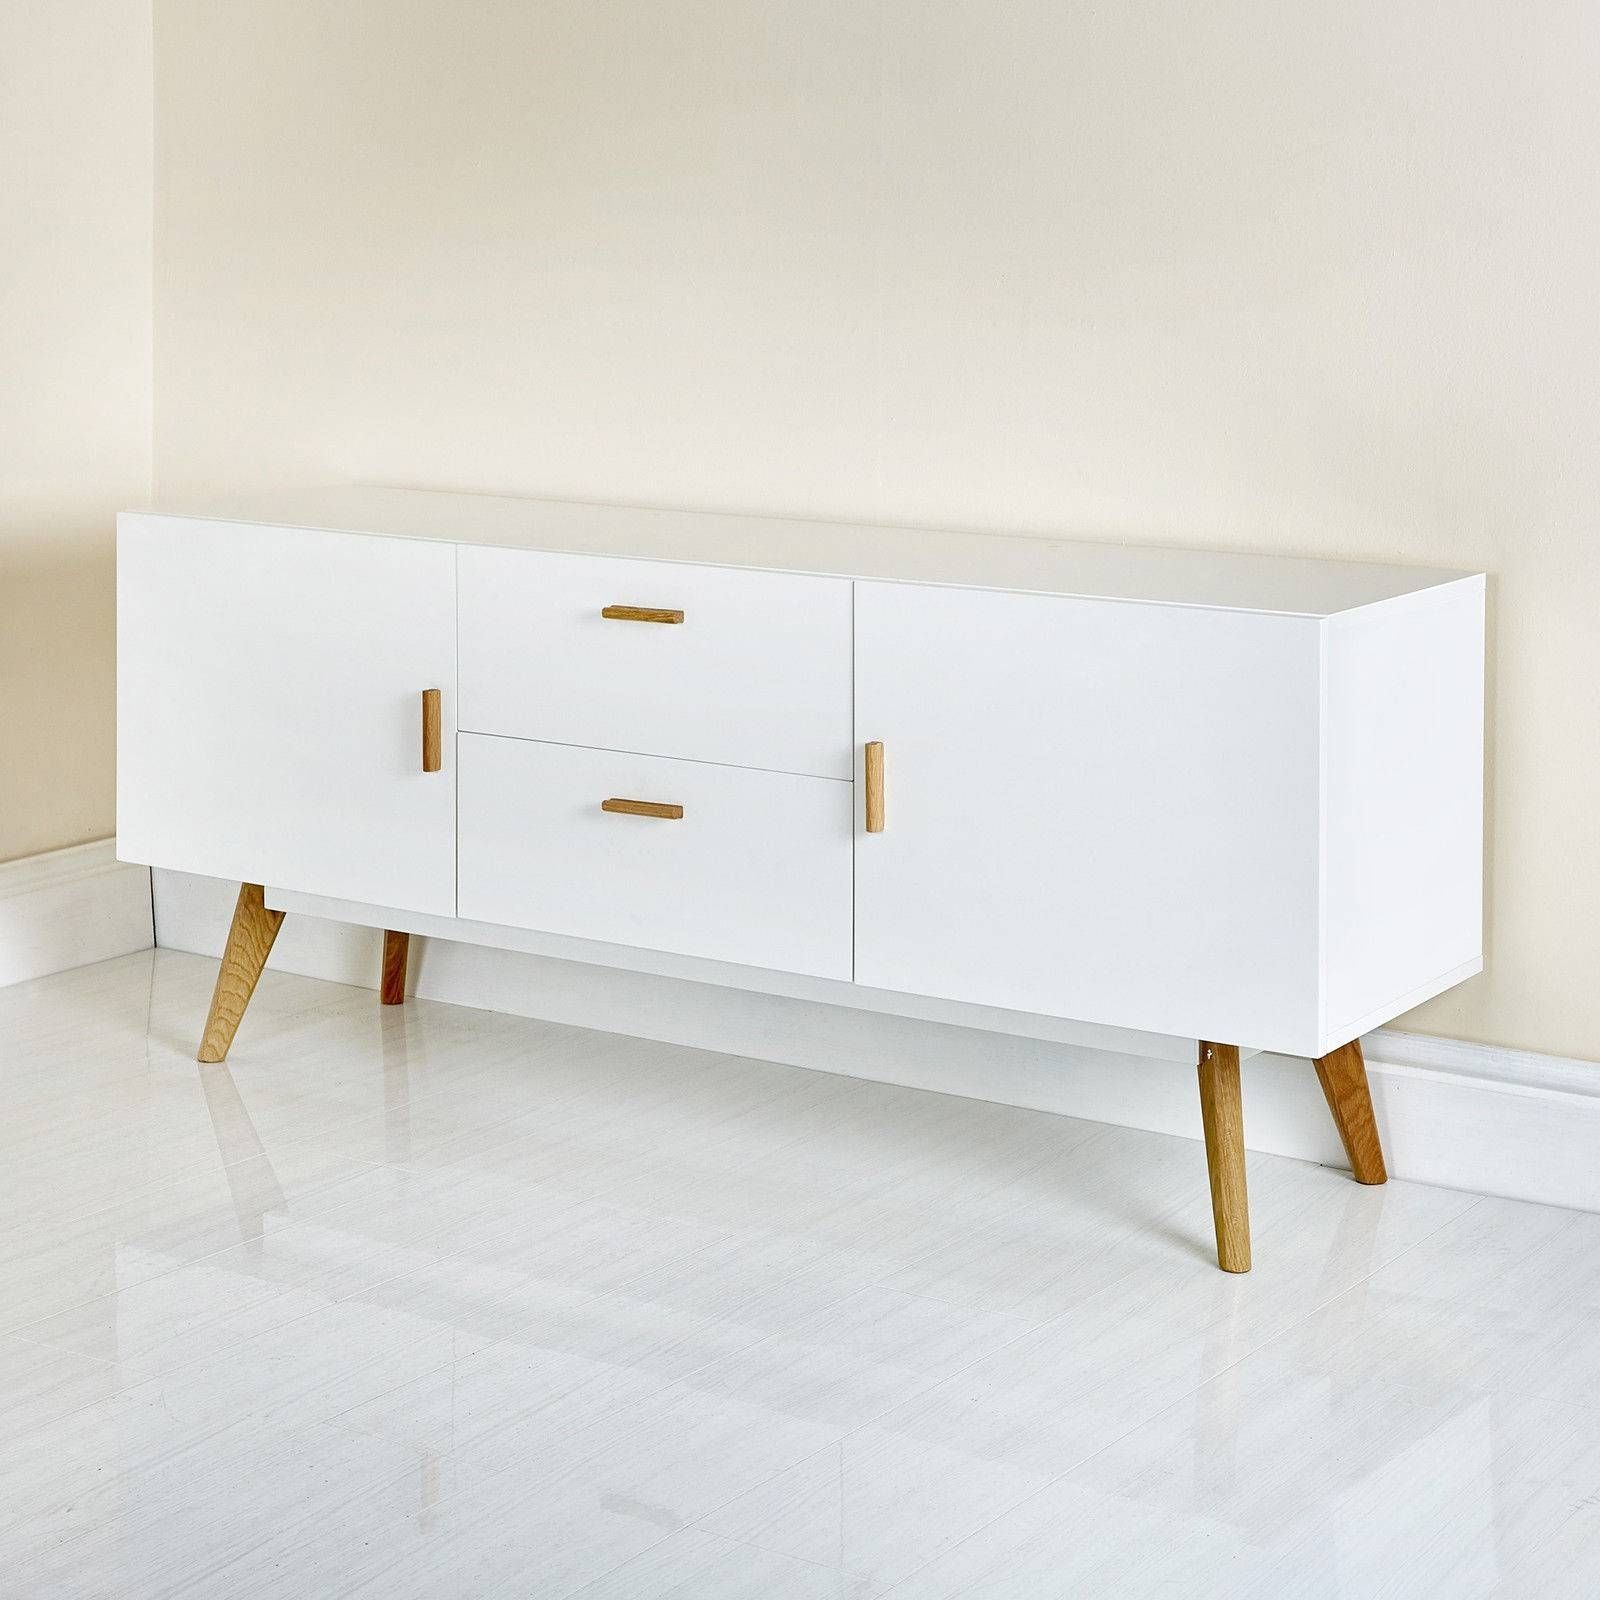 Scandinavian Retro Style White Sideboard Abreo Home Furniture Throughout Retro Sideboards (View 7 of 20)